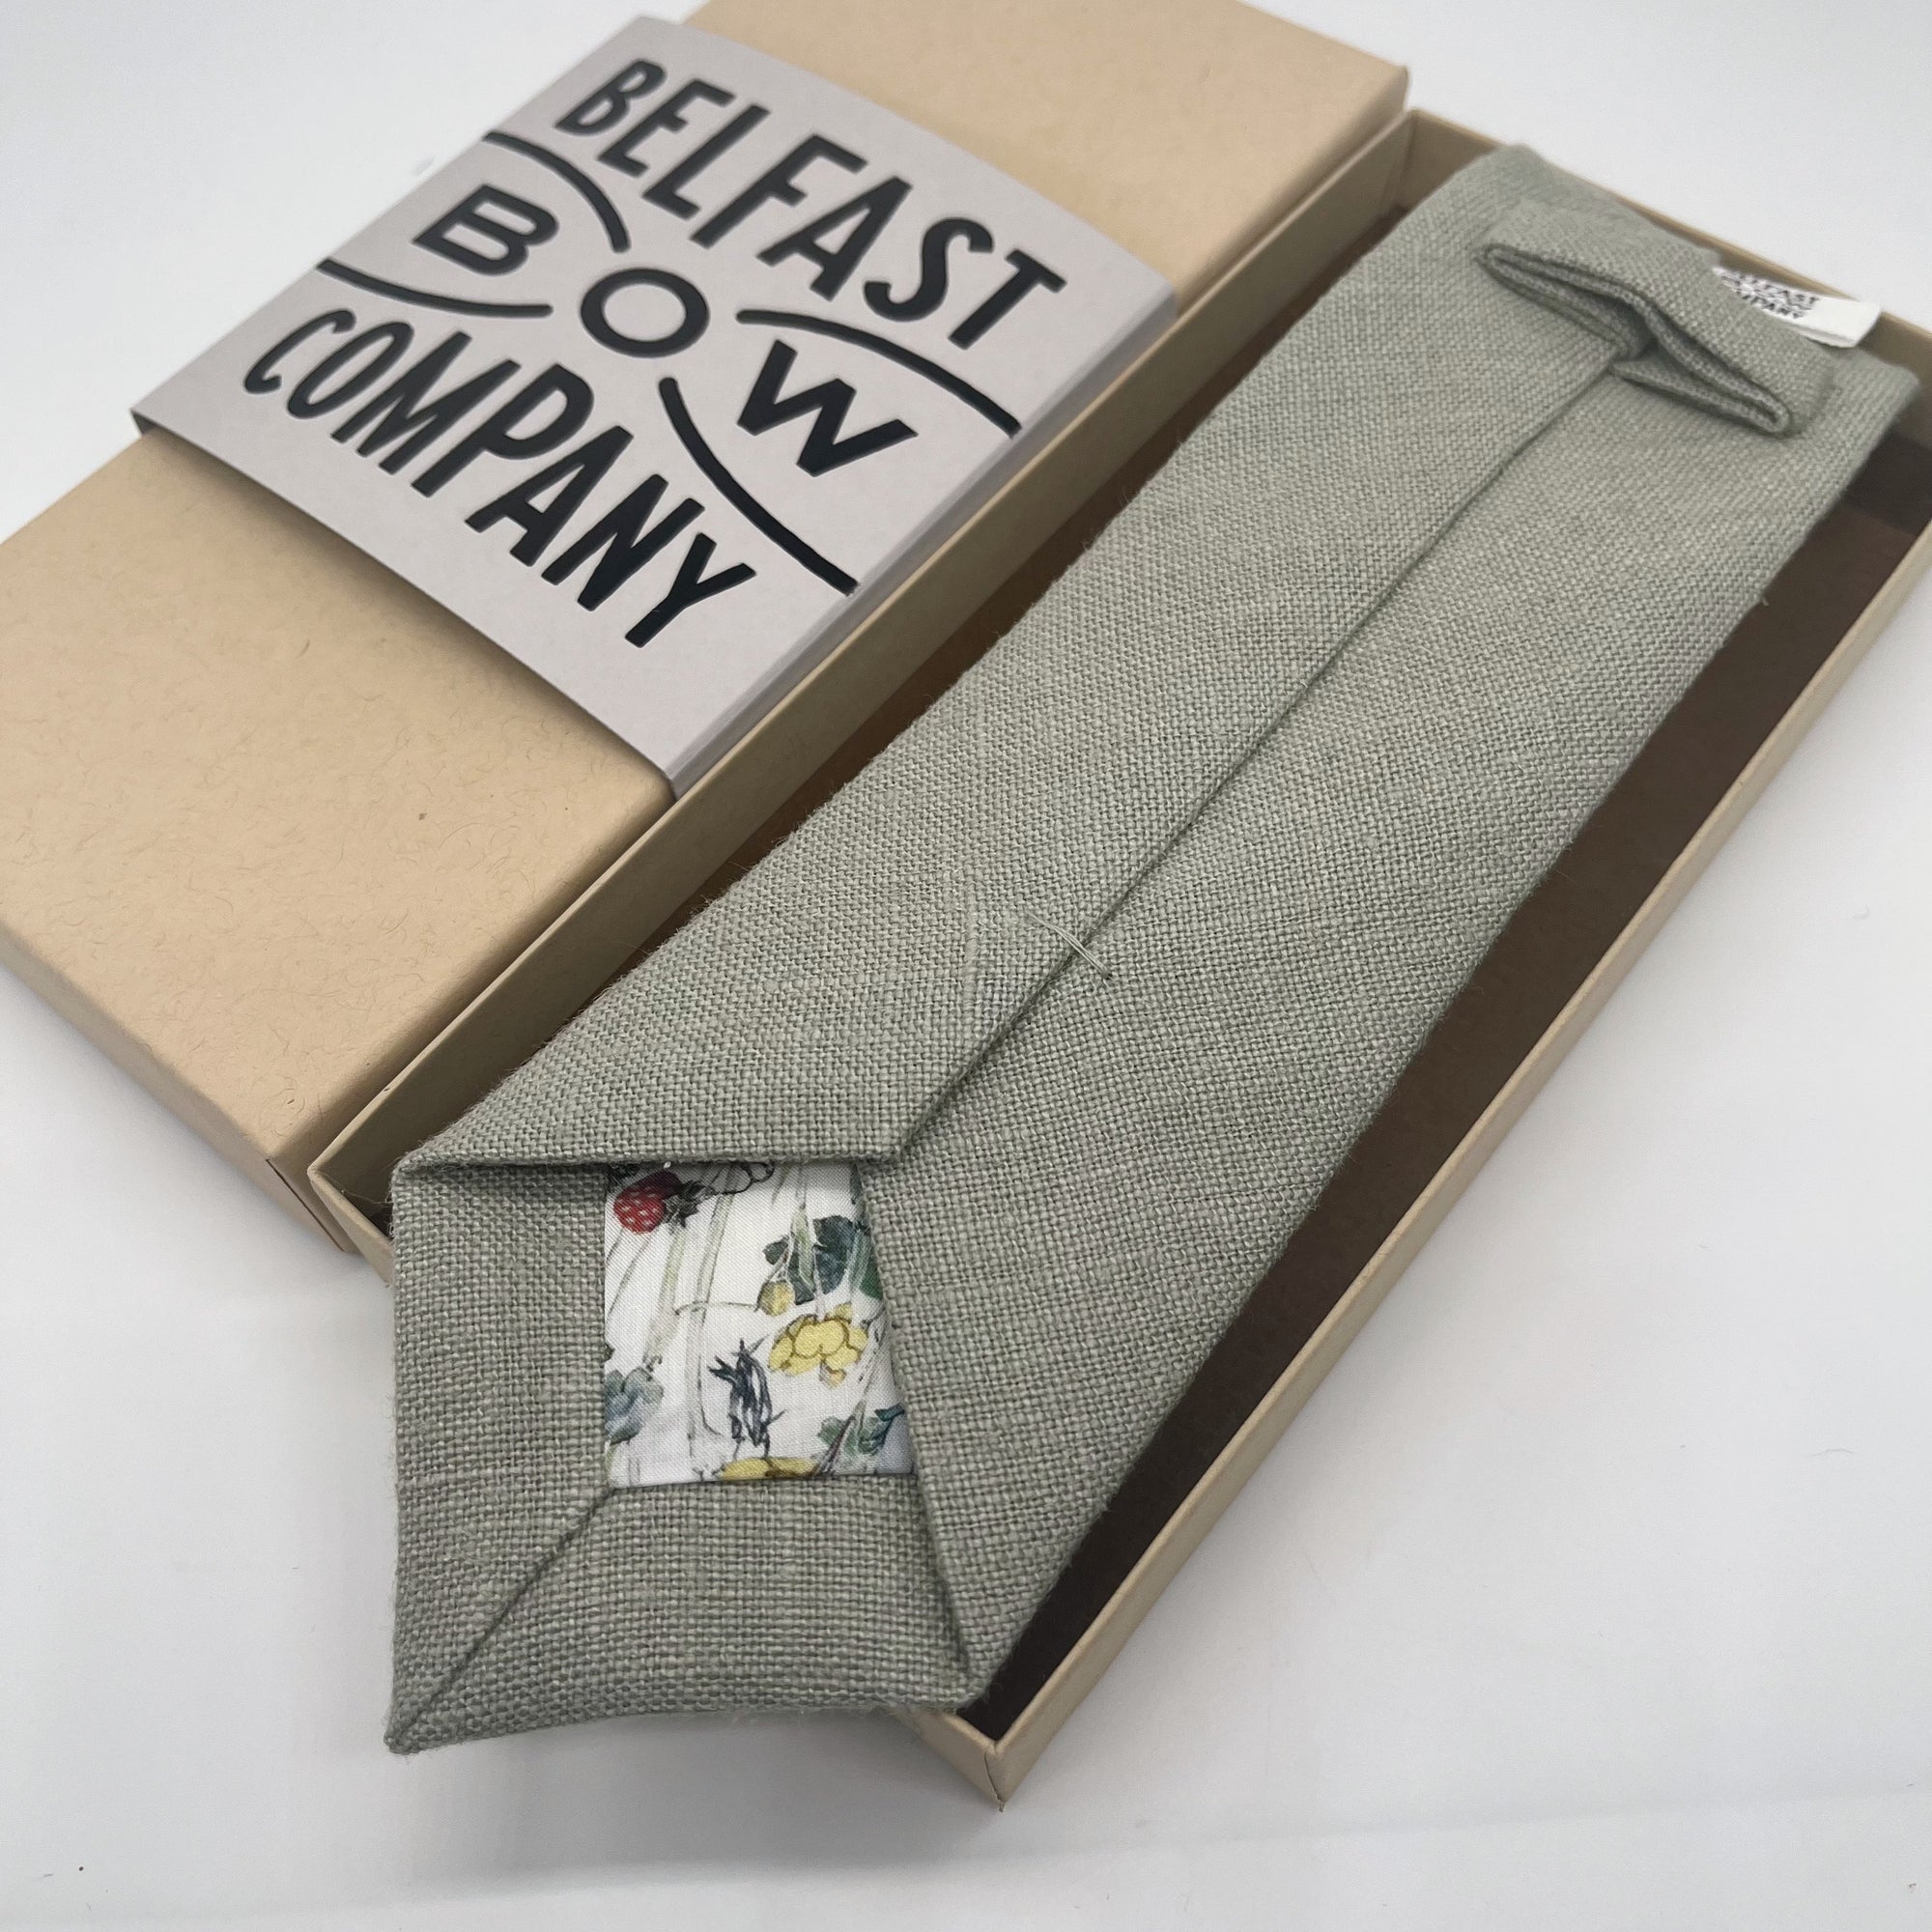 Irish Linen Tie in Sage Green by the Belfast Bow Company